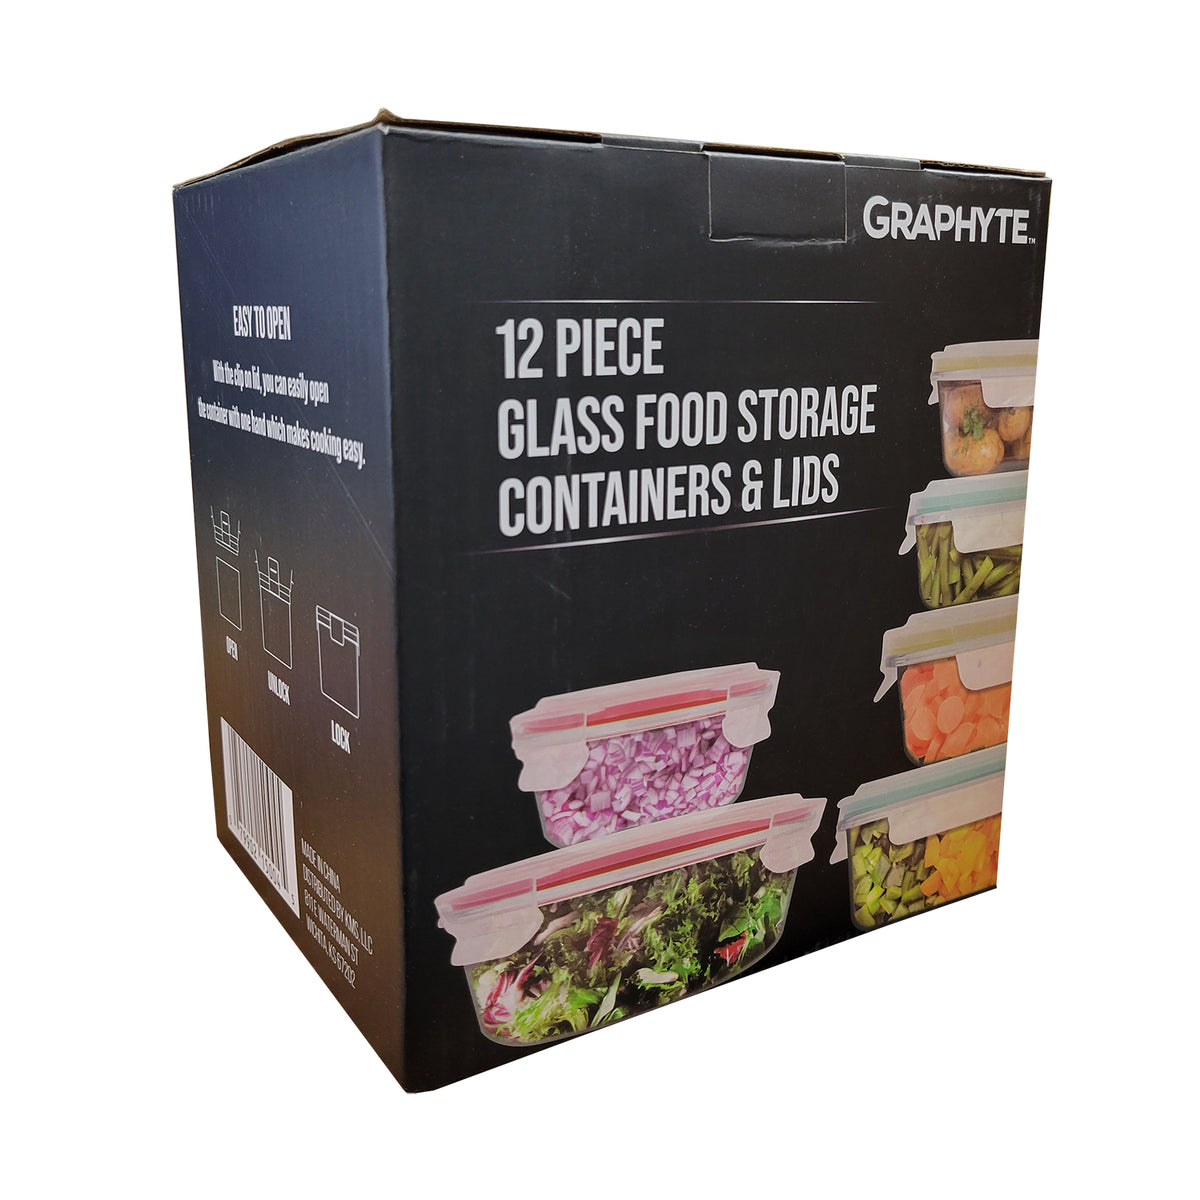 Graphyte Glass Food Storage Containers with Lids Airtight 12 Pieces, Glass Storage Containers with Lids for Food